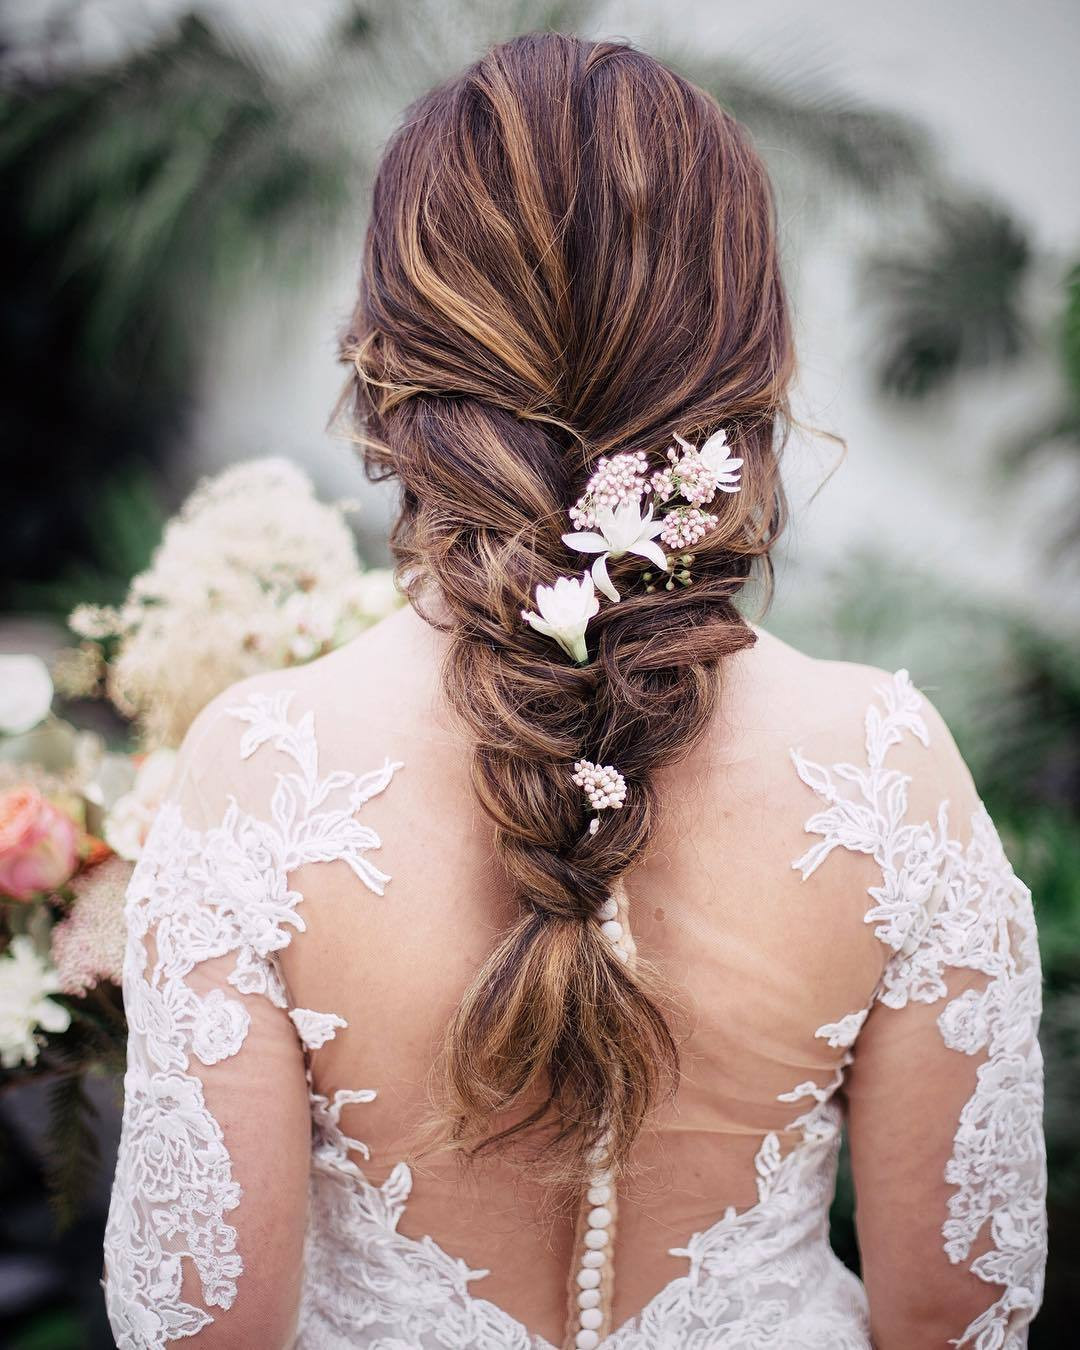 Wedding Hairstyles With Braids For Long Hair
 47 Stunning Wedding Hairstyles All Brides Will Love in 2019